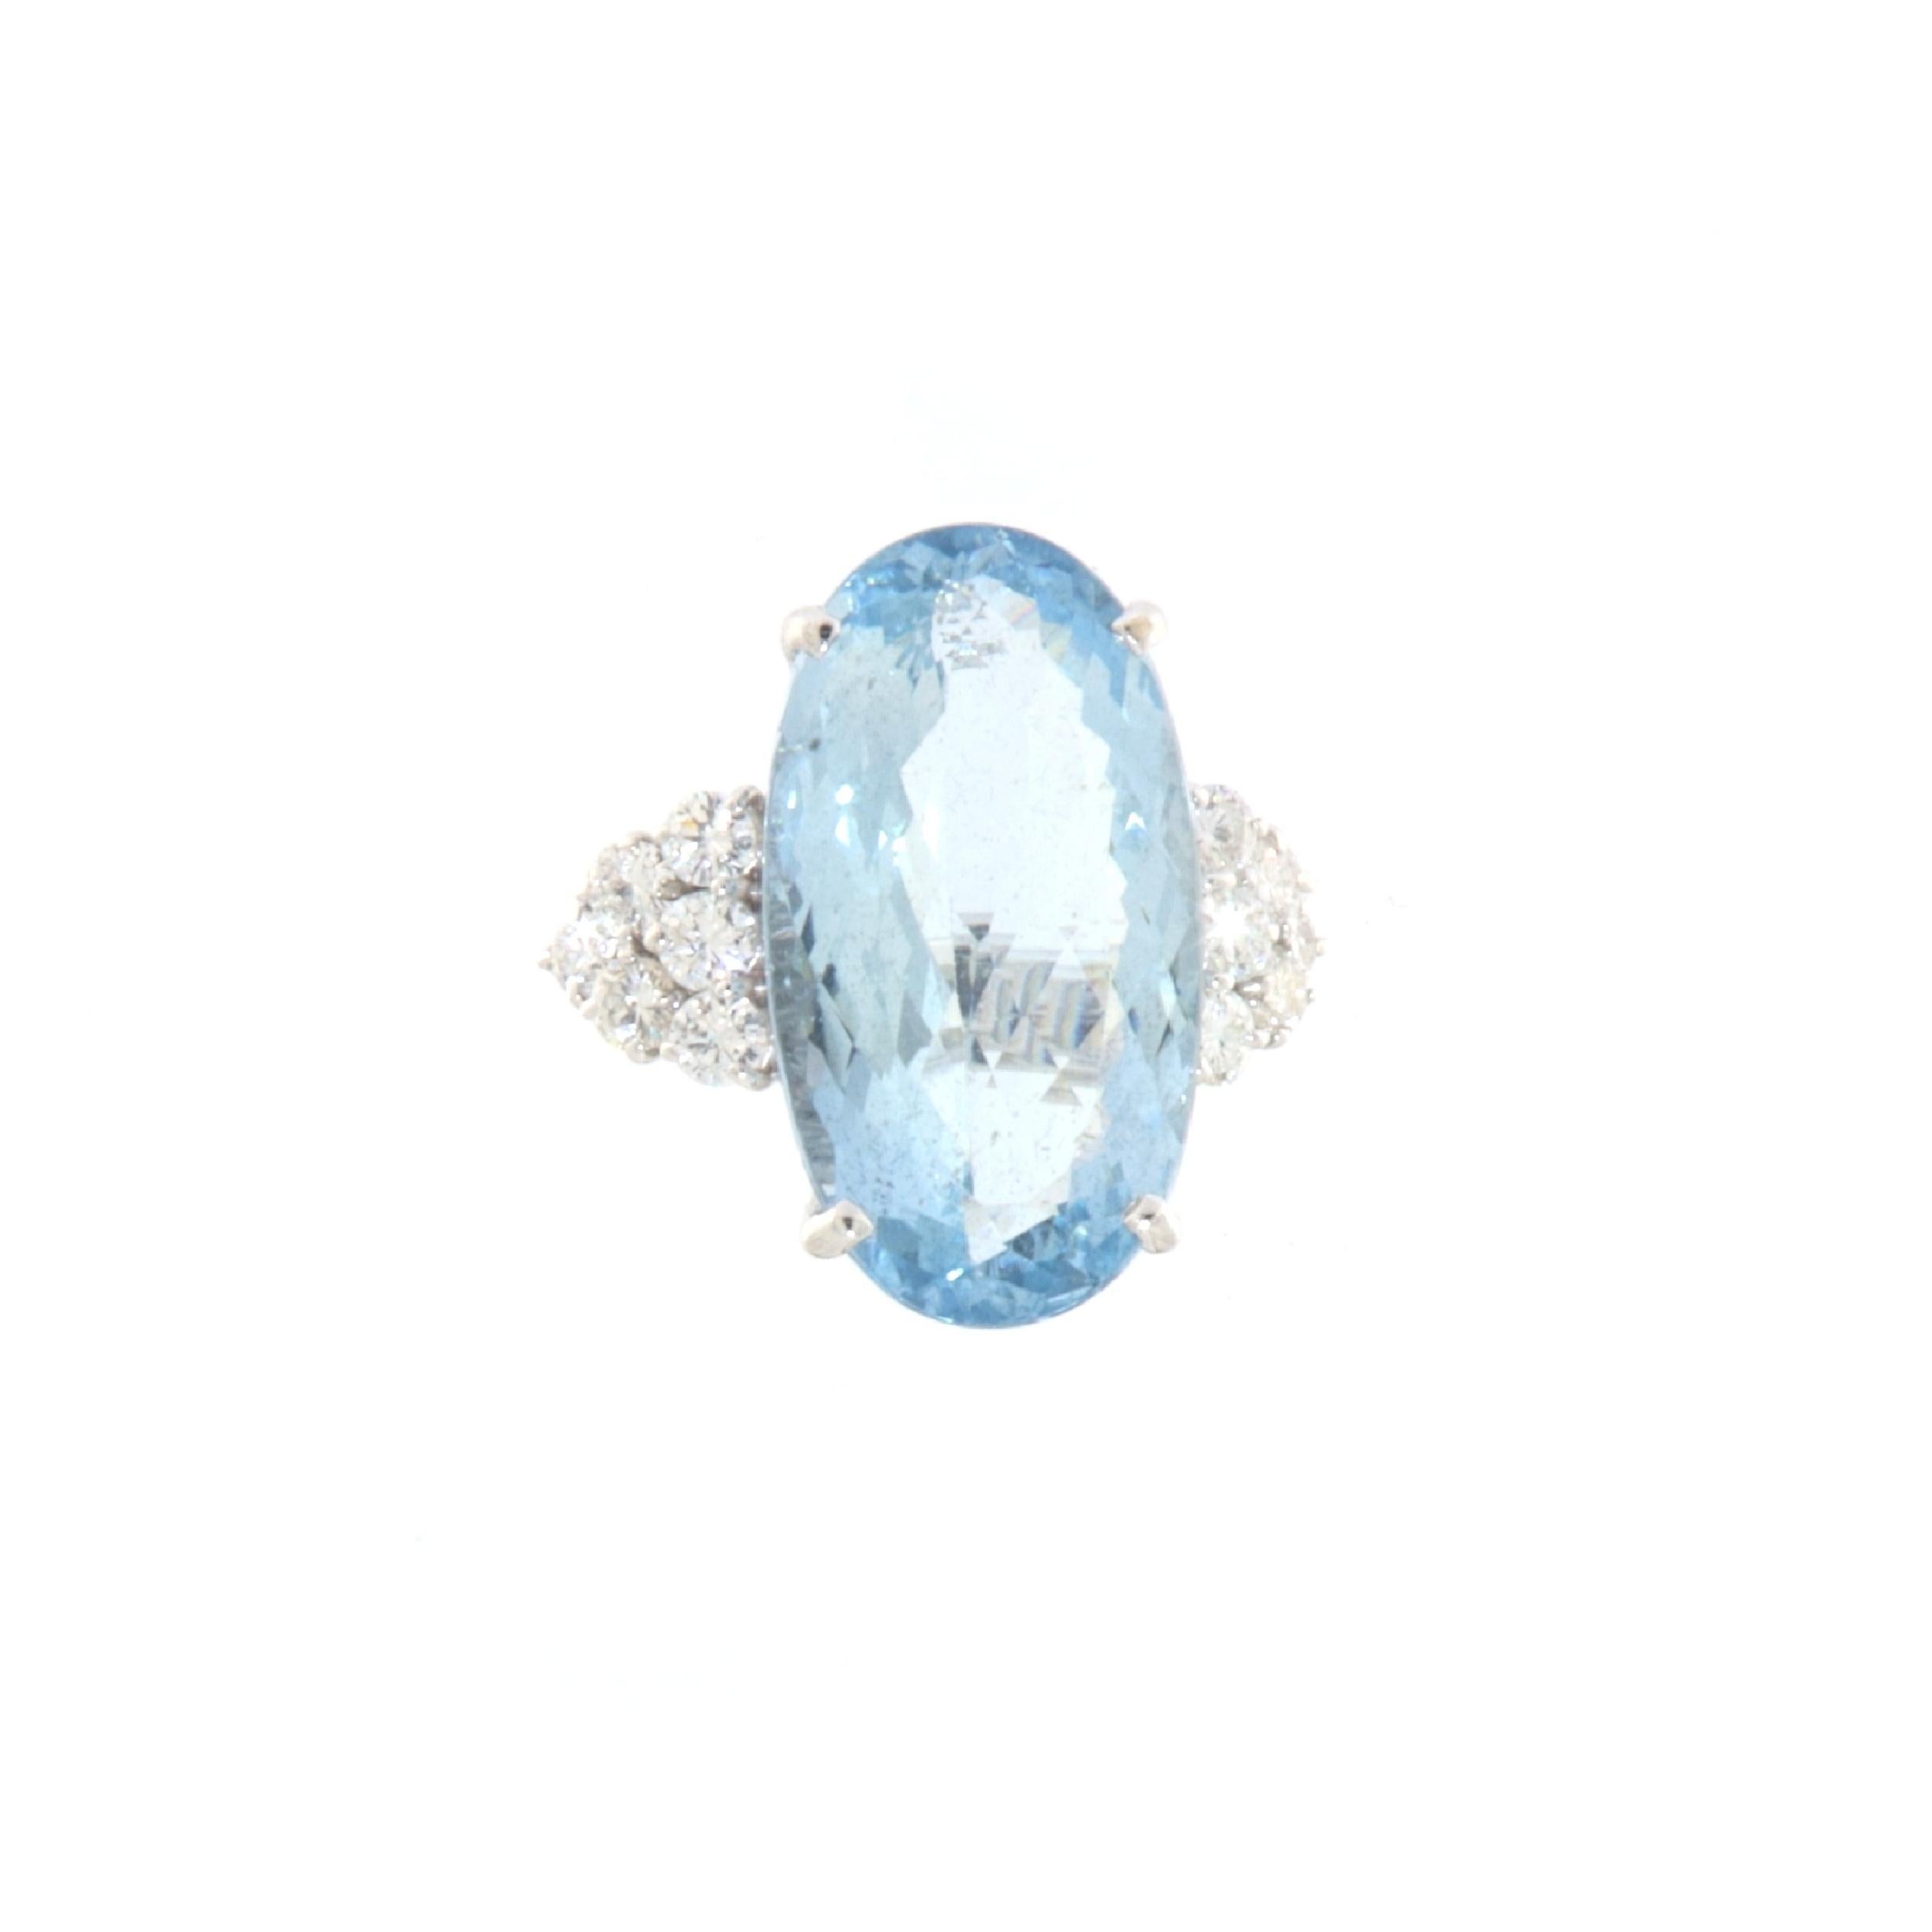 This ring in 18-karat white gold embodies sophistication and luxury, pairing the enchanting brightness of gold with the freshness of a Brazilian aquamarine. Positioned centrally, the aquamarine shines in a crystalline blue hue, meticulously chosen